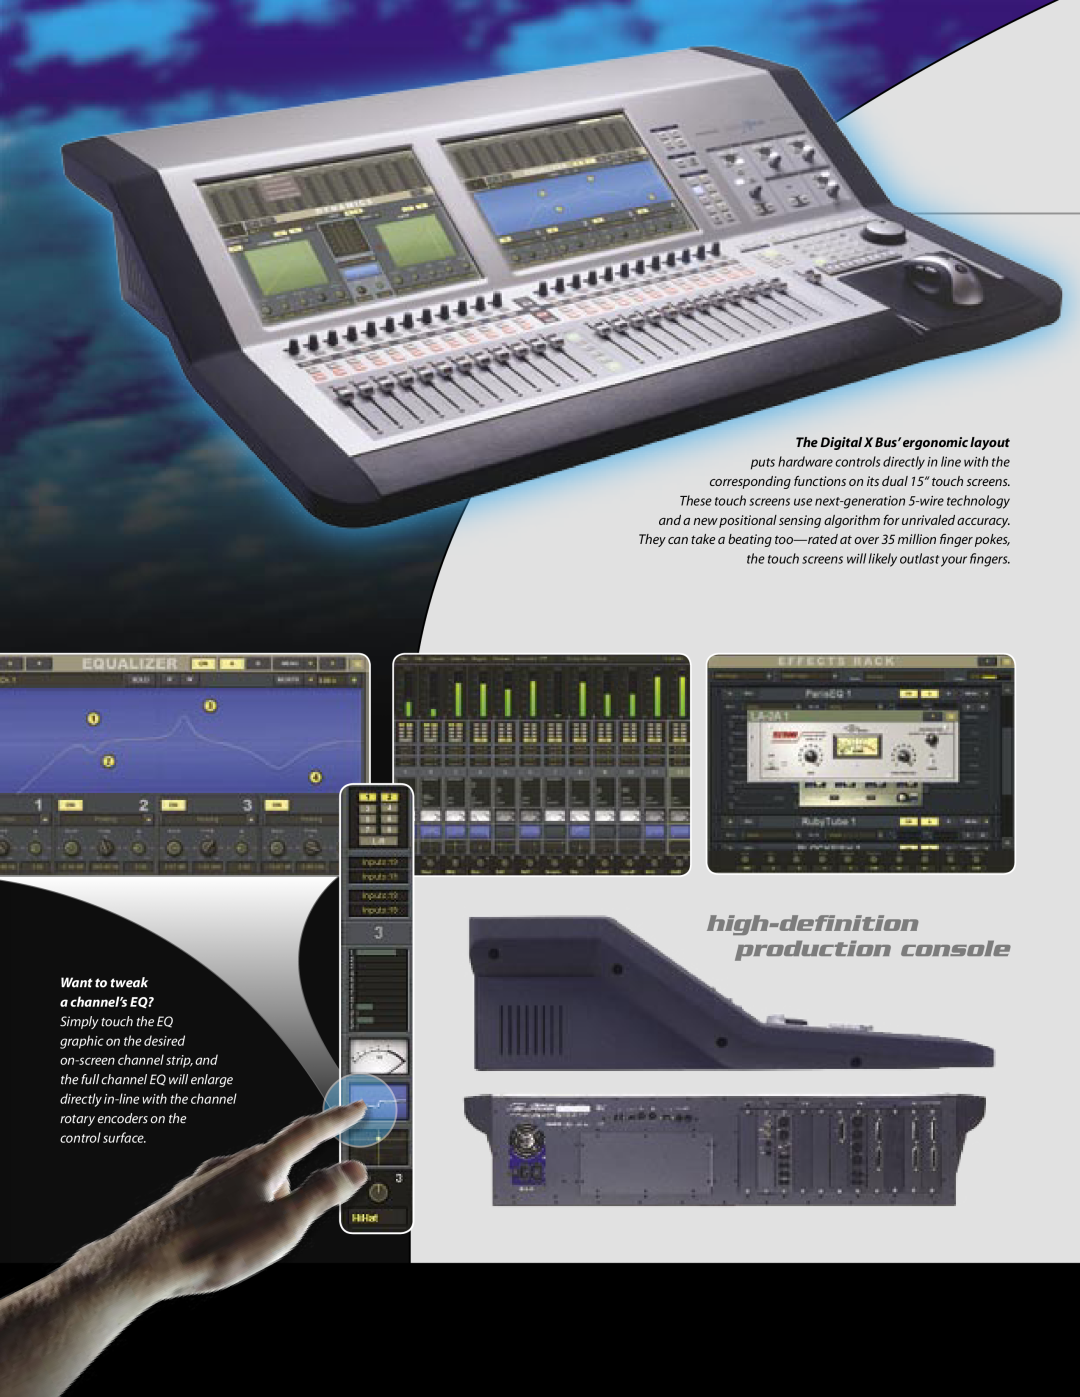 Mackie P/N0012557 high-deﬁnition production console, The Digital X Bus’ ergonomic layout, Want to tweak a channel’s EQ? 